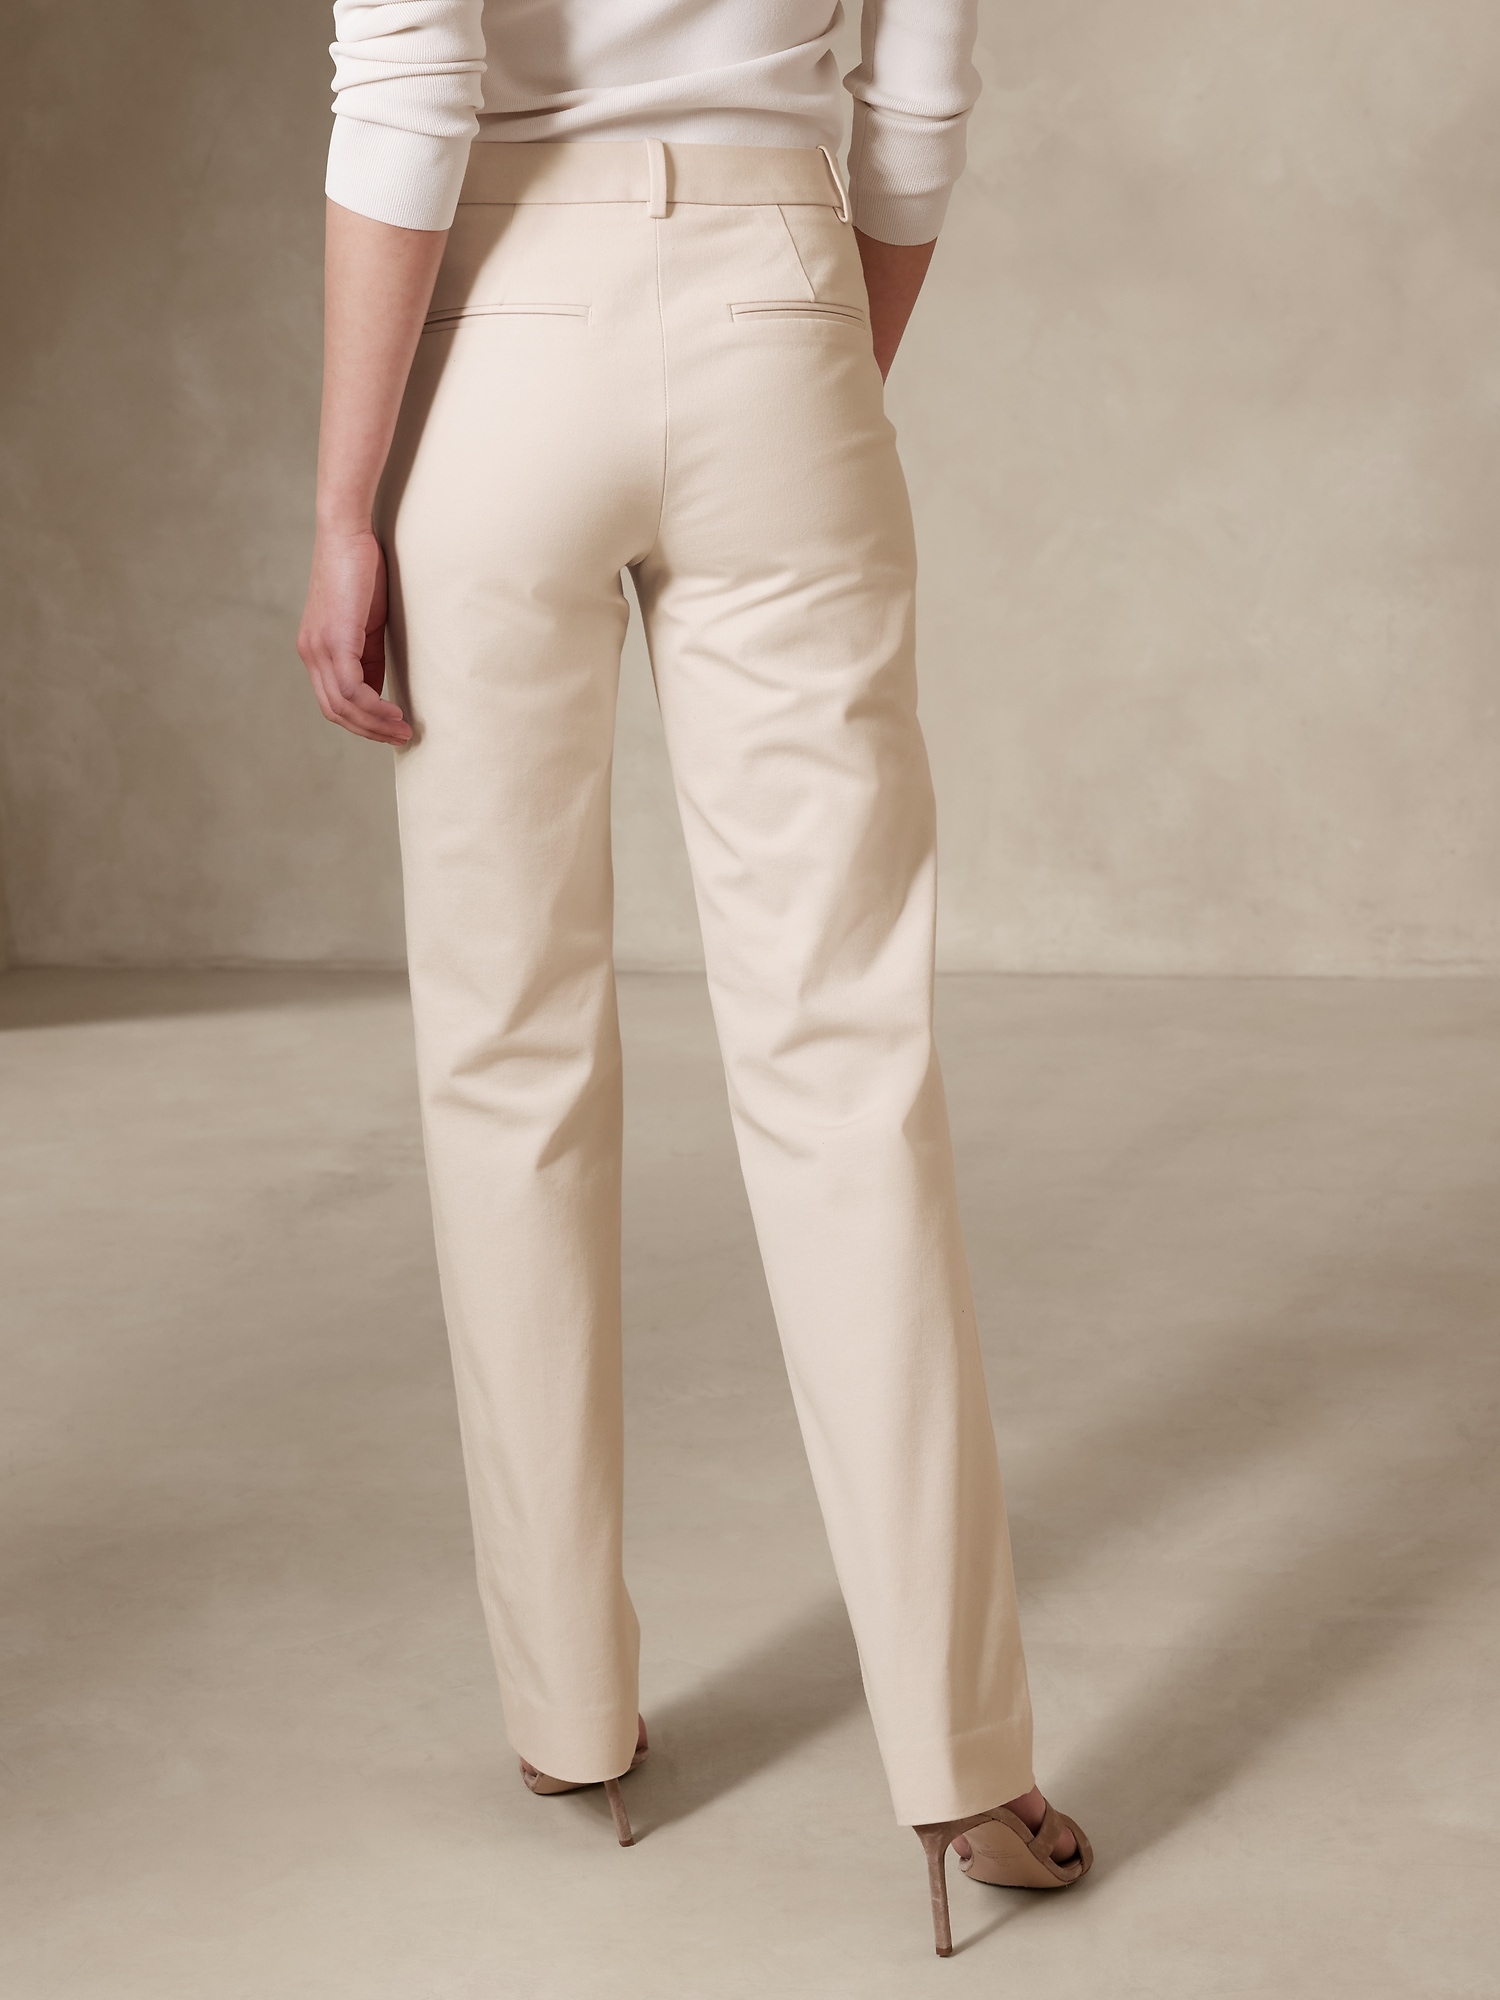 How To Wear The Sloan Pant From Banana Republic - My Style Pill